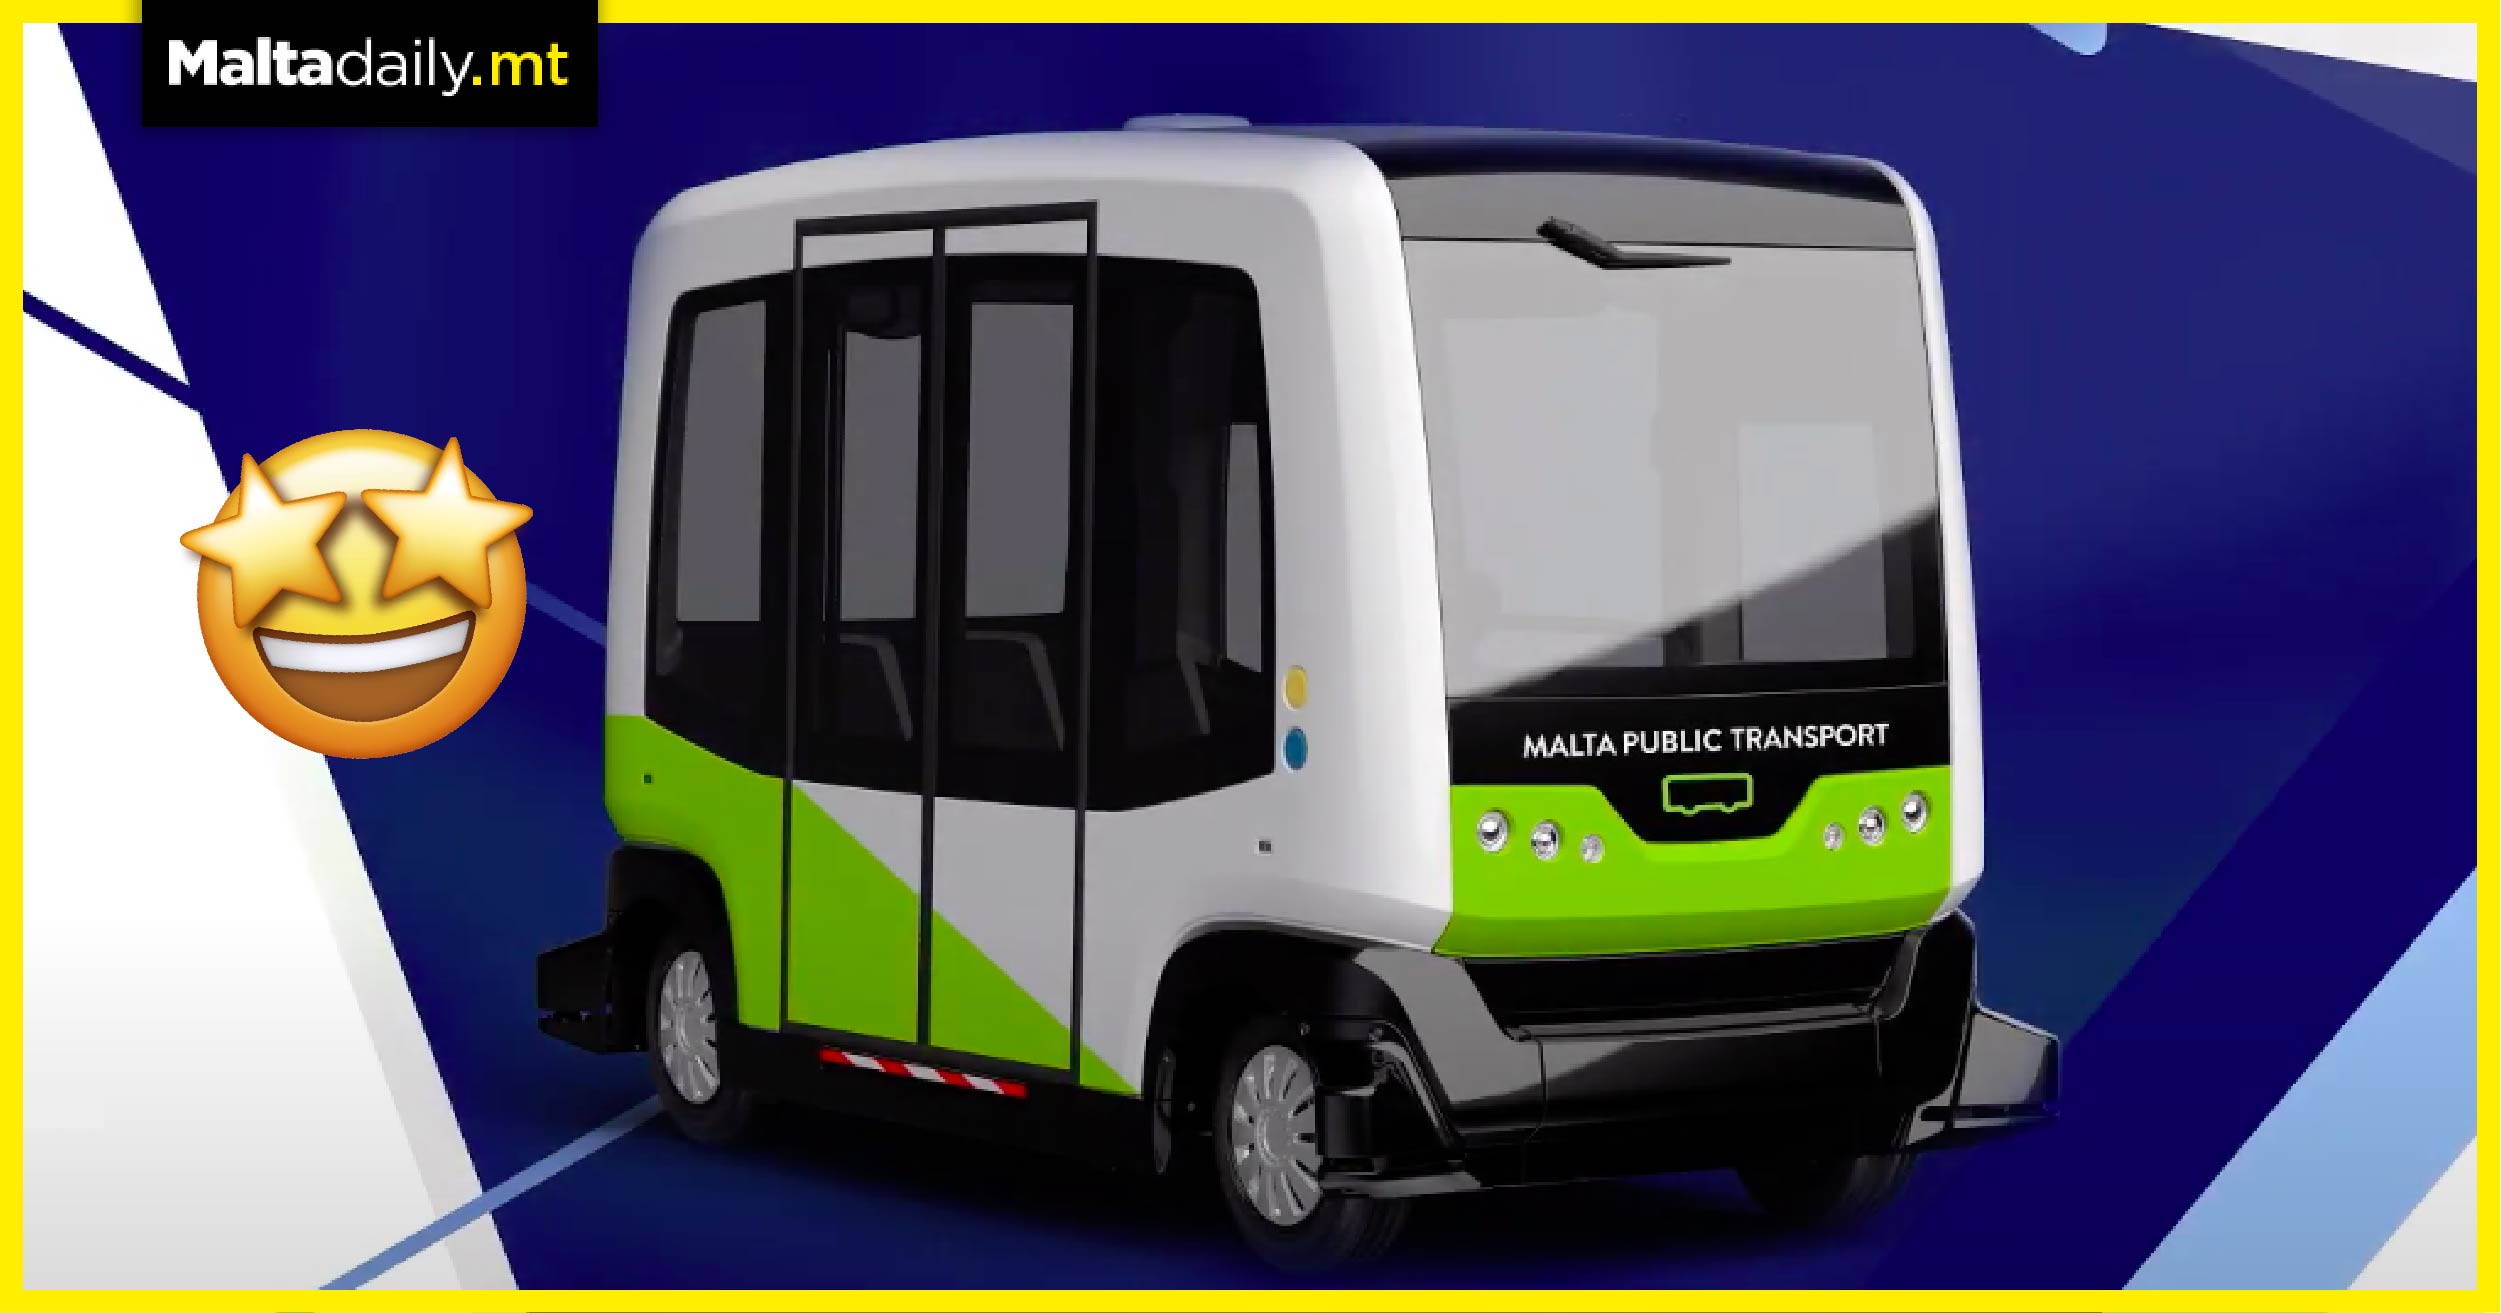 Malta could test driverless buses as soon as 2022